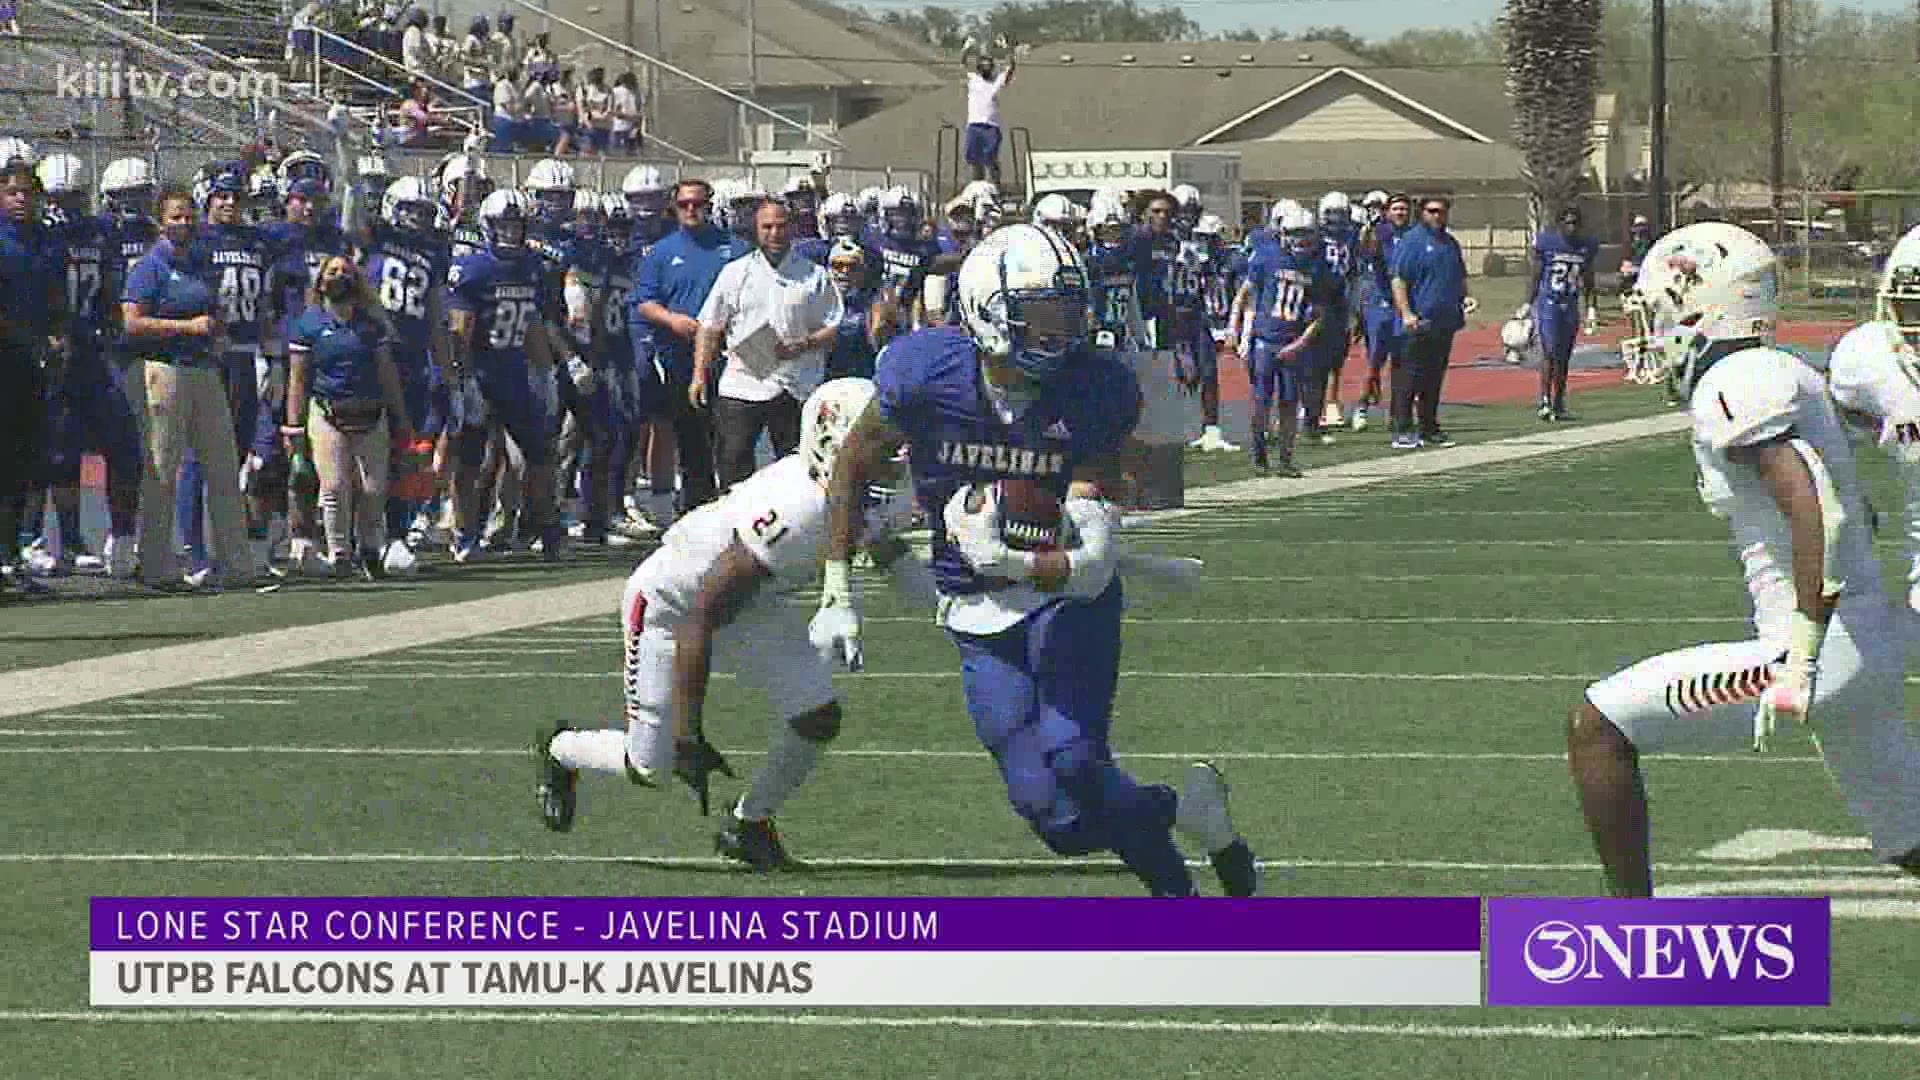 Texas A&M-Kingsville couldn't get in the endzone in a 17-2 loss to the Falcons.